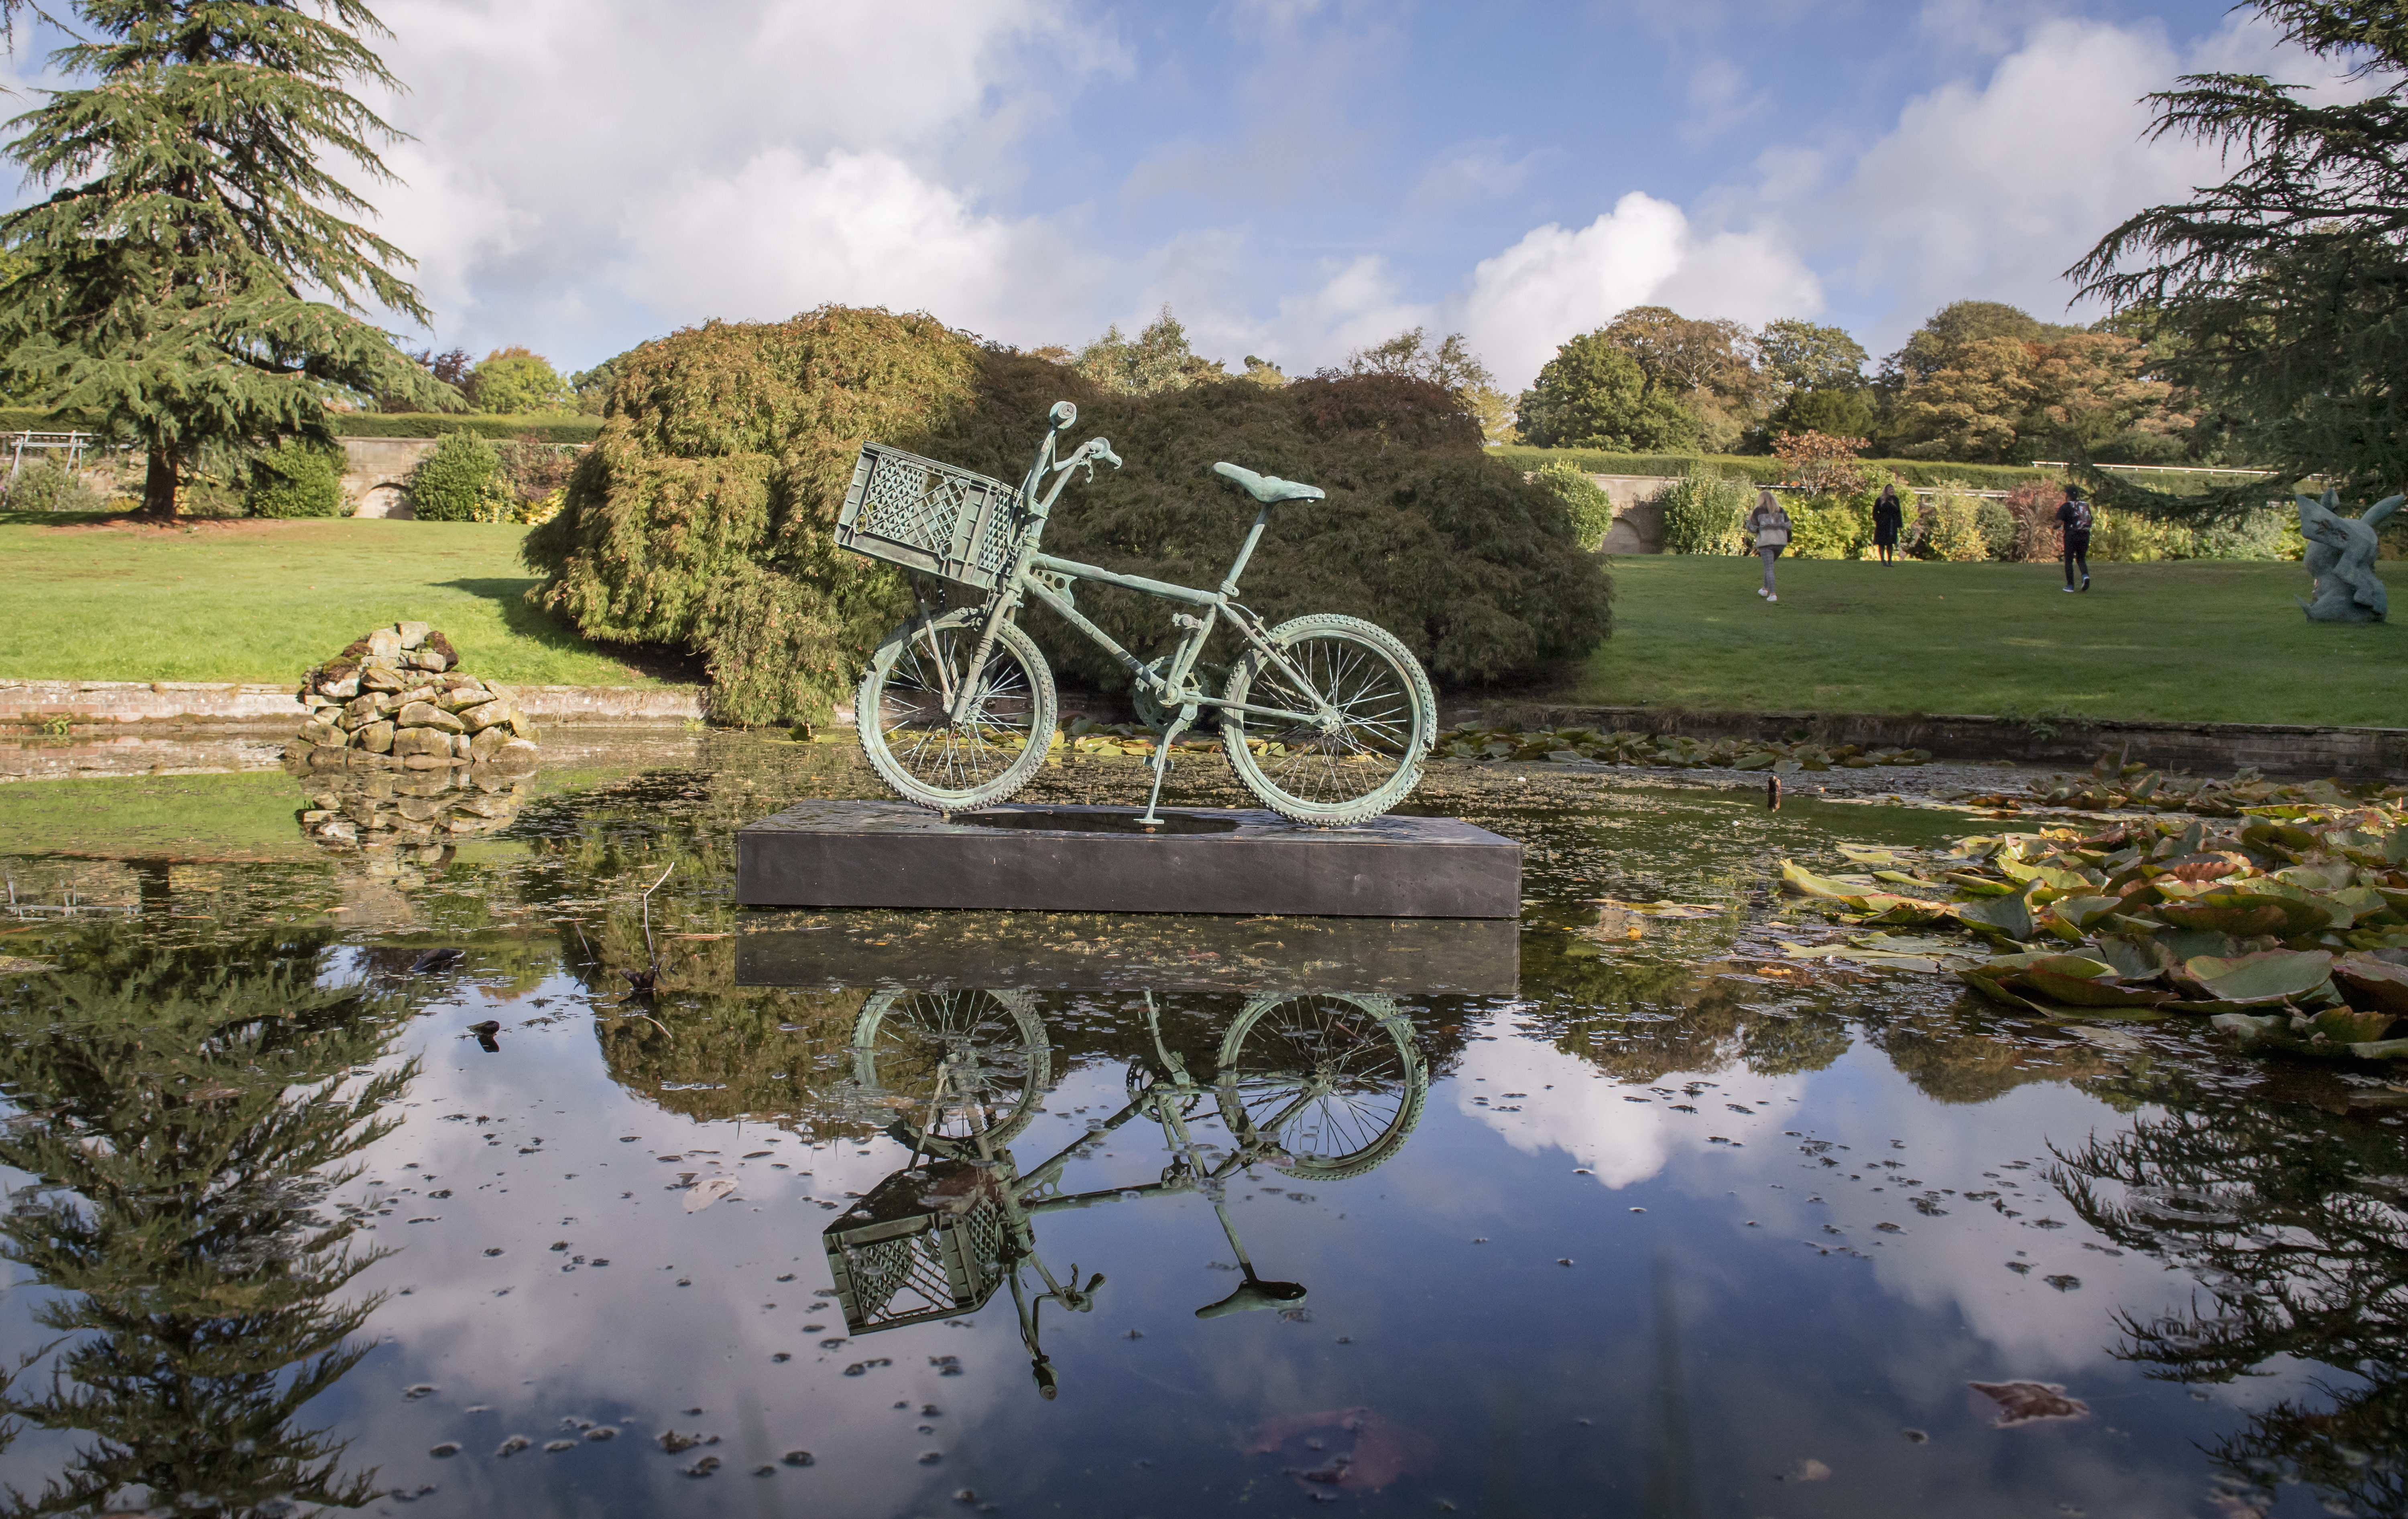 A bronze bicycle sculpture displayed on a plinth in the middle of a pond.